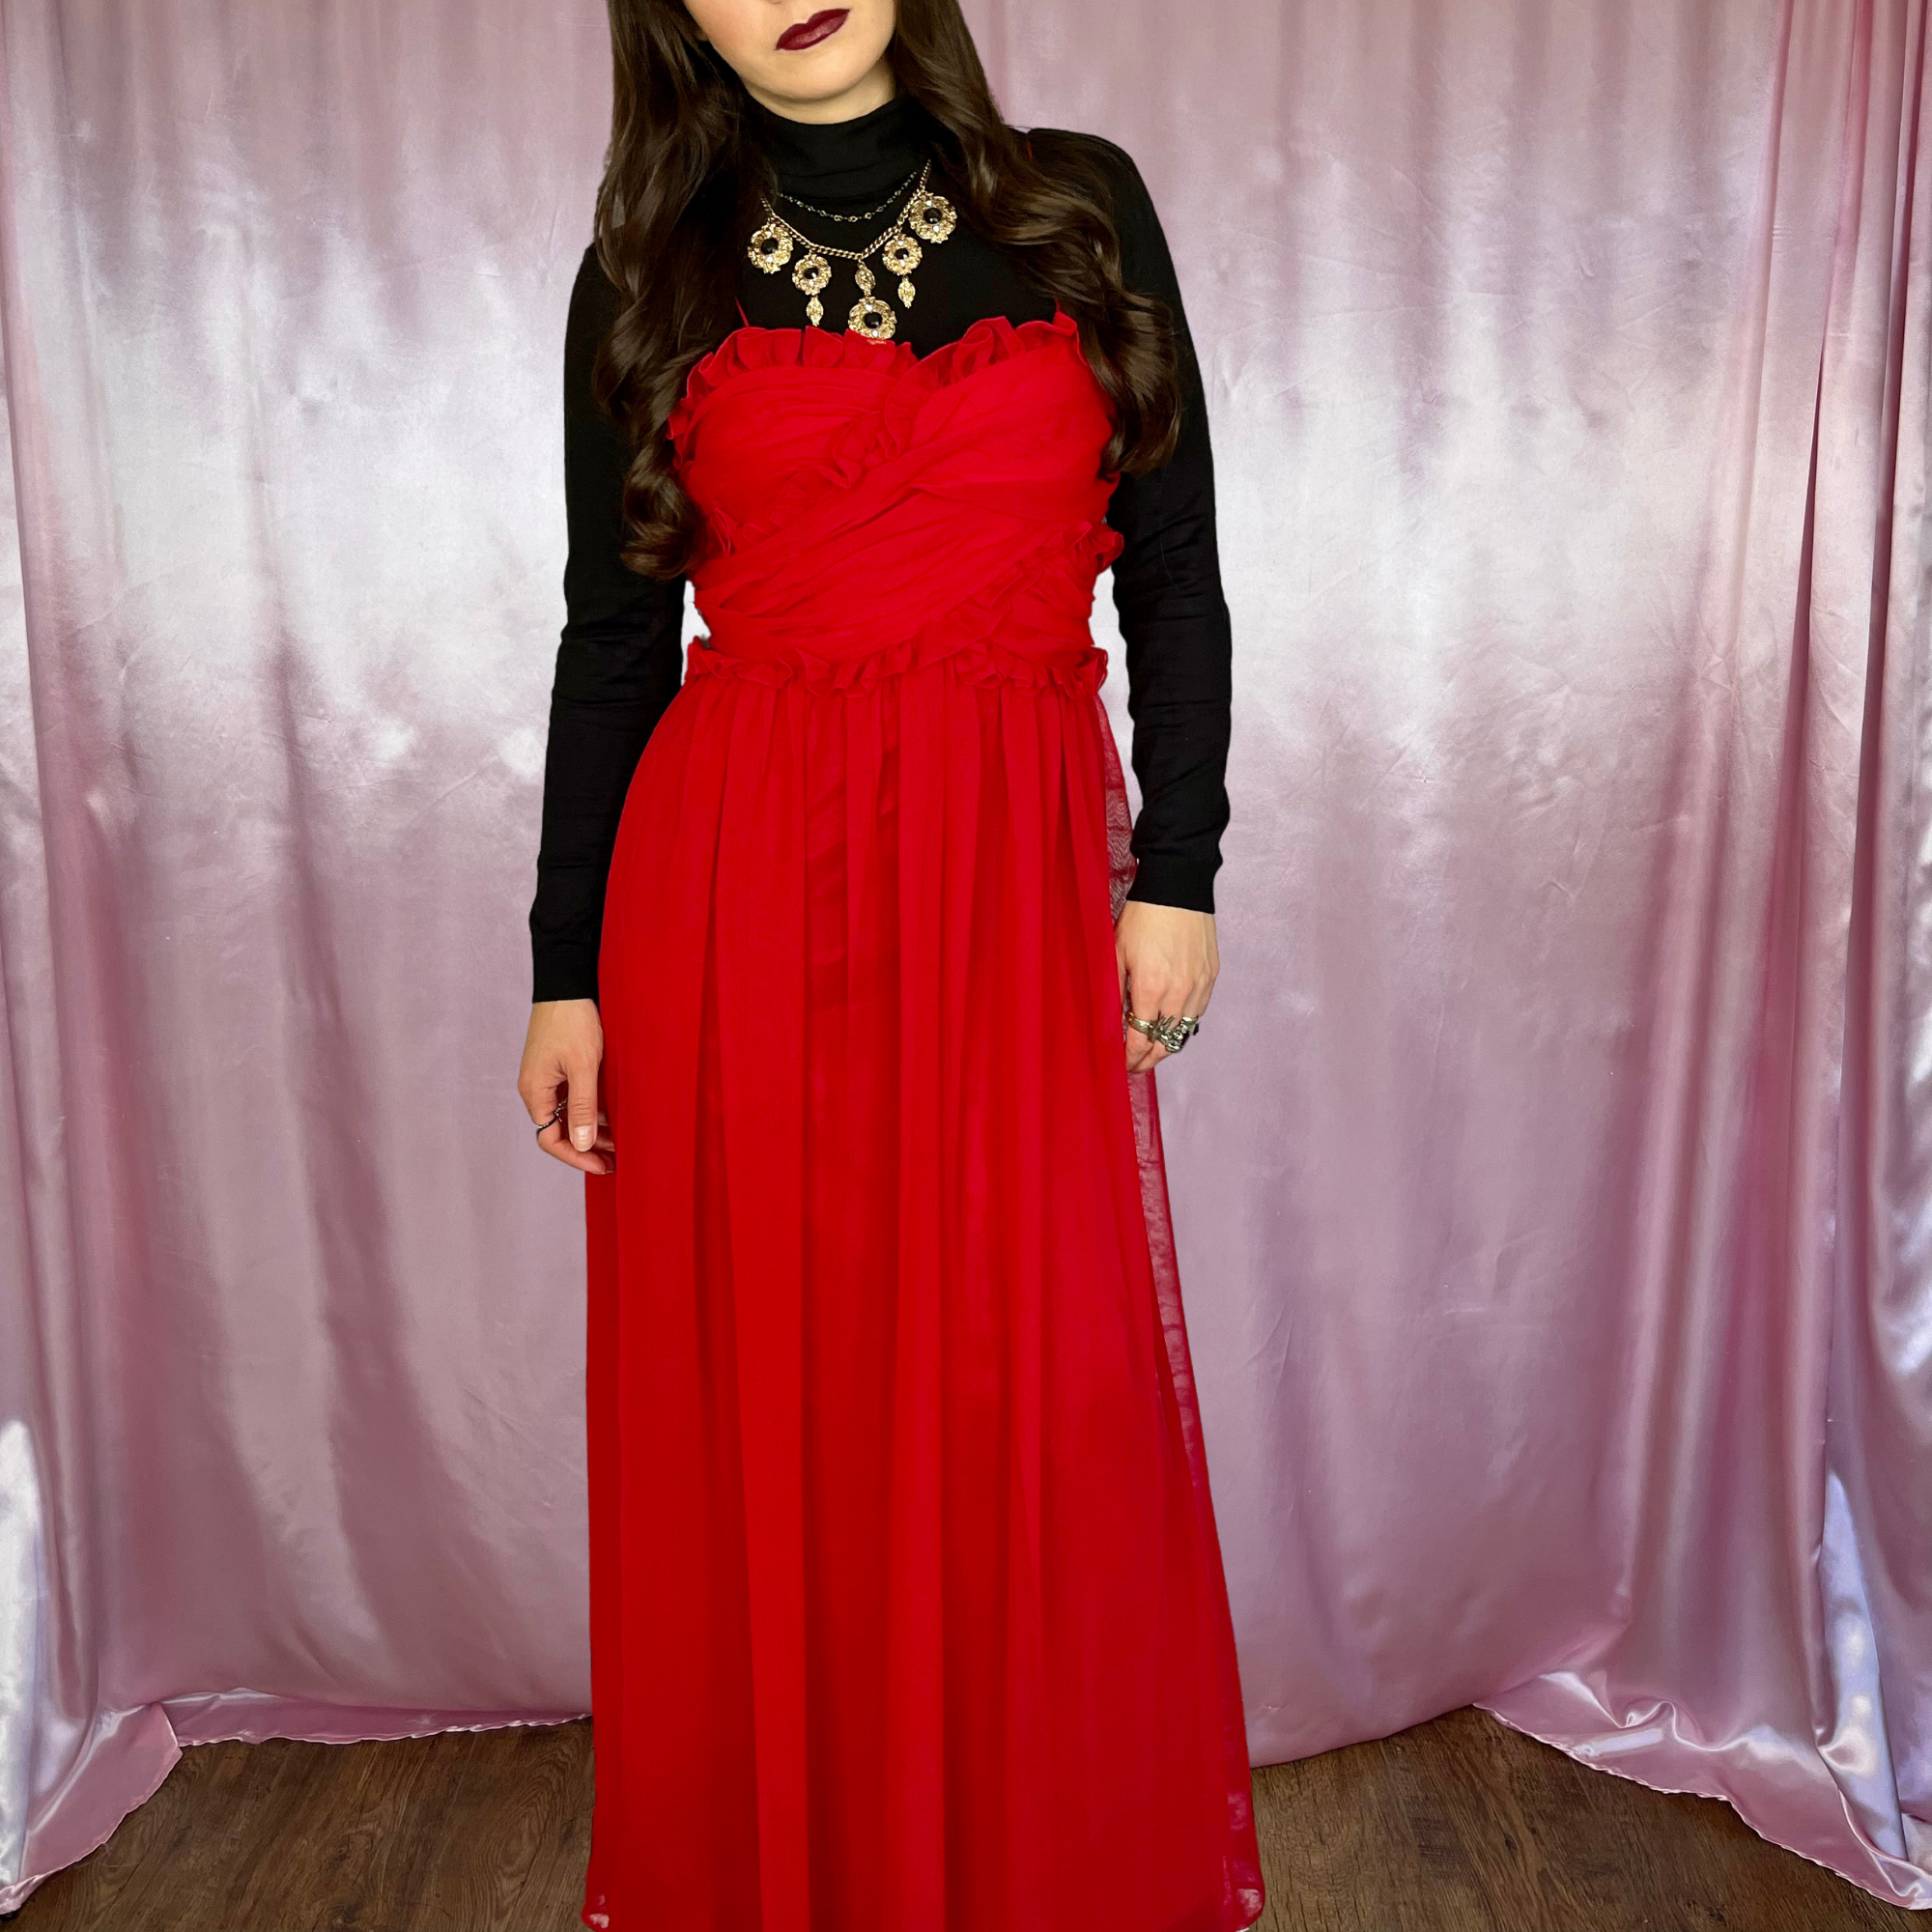 Red Prom Dresses | Gallery of current season red prom dresses | Cardiff